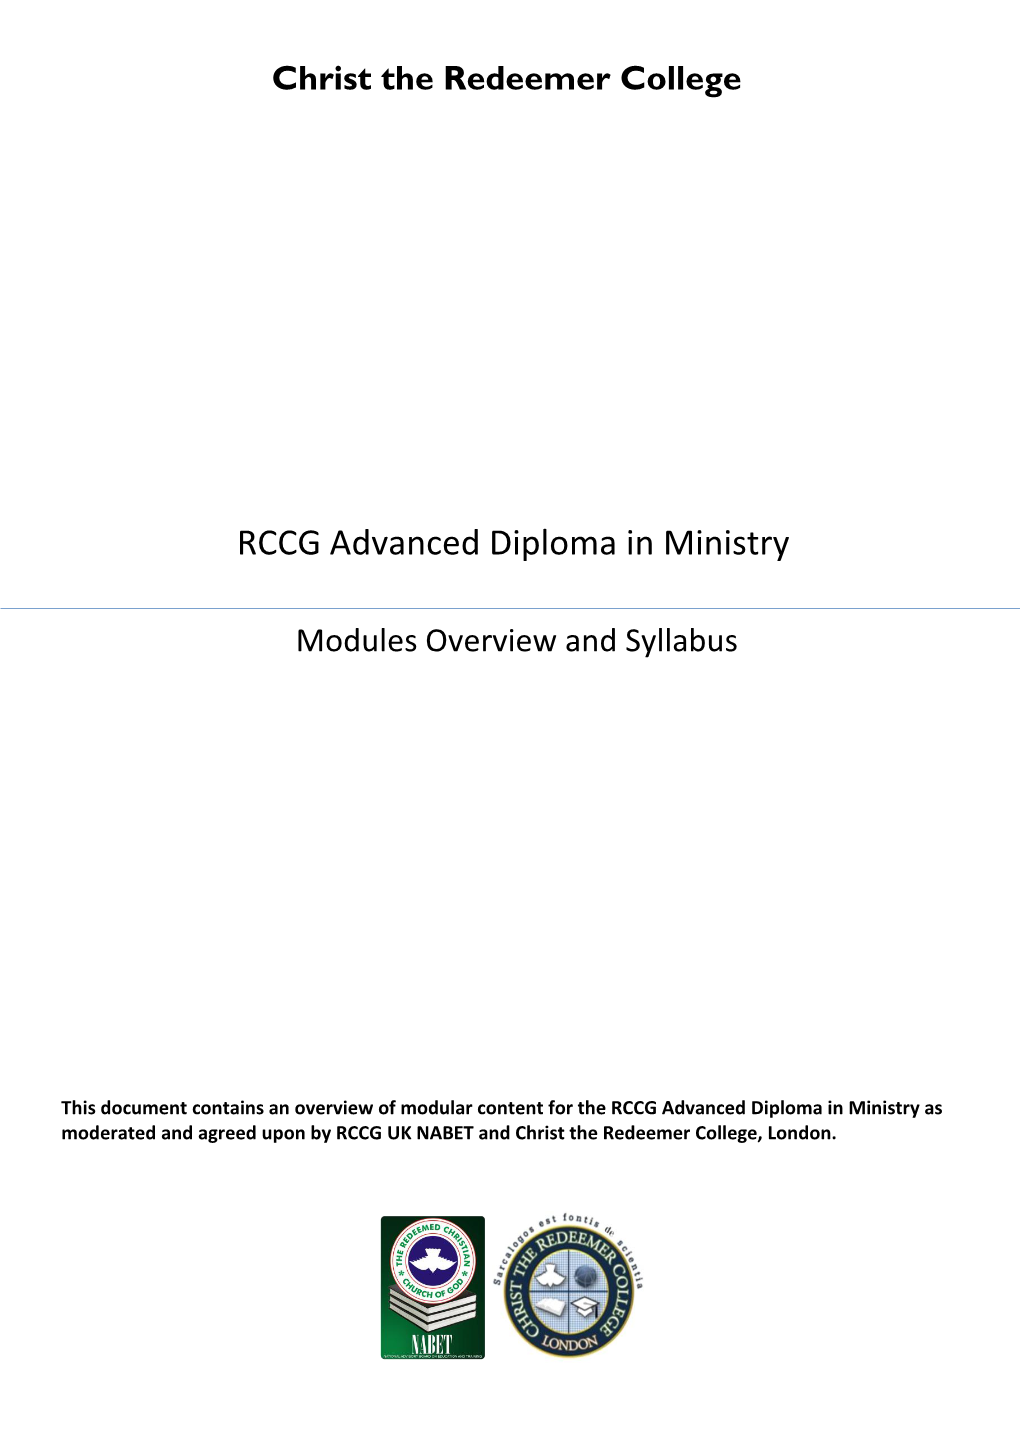 RCCG Advanced Diploma in Ministry